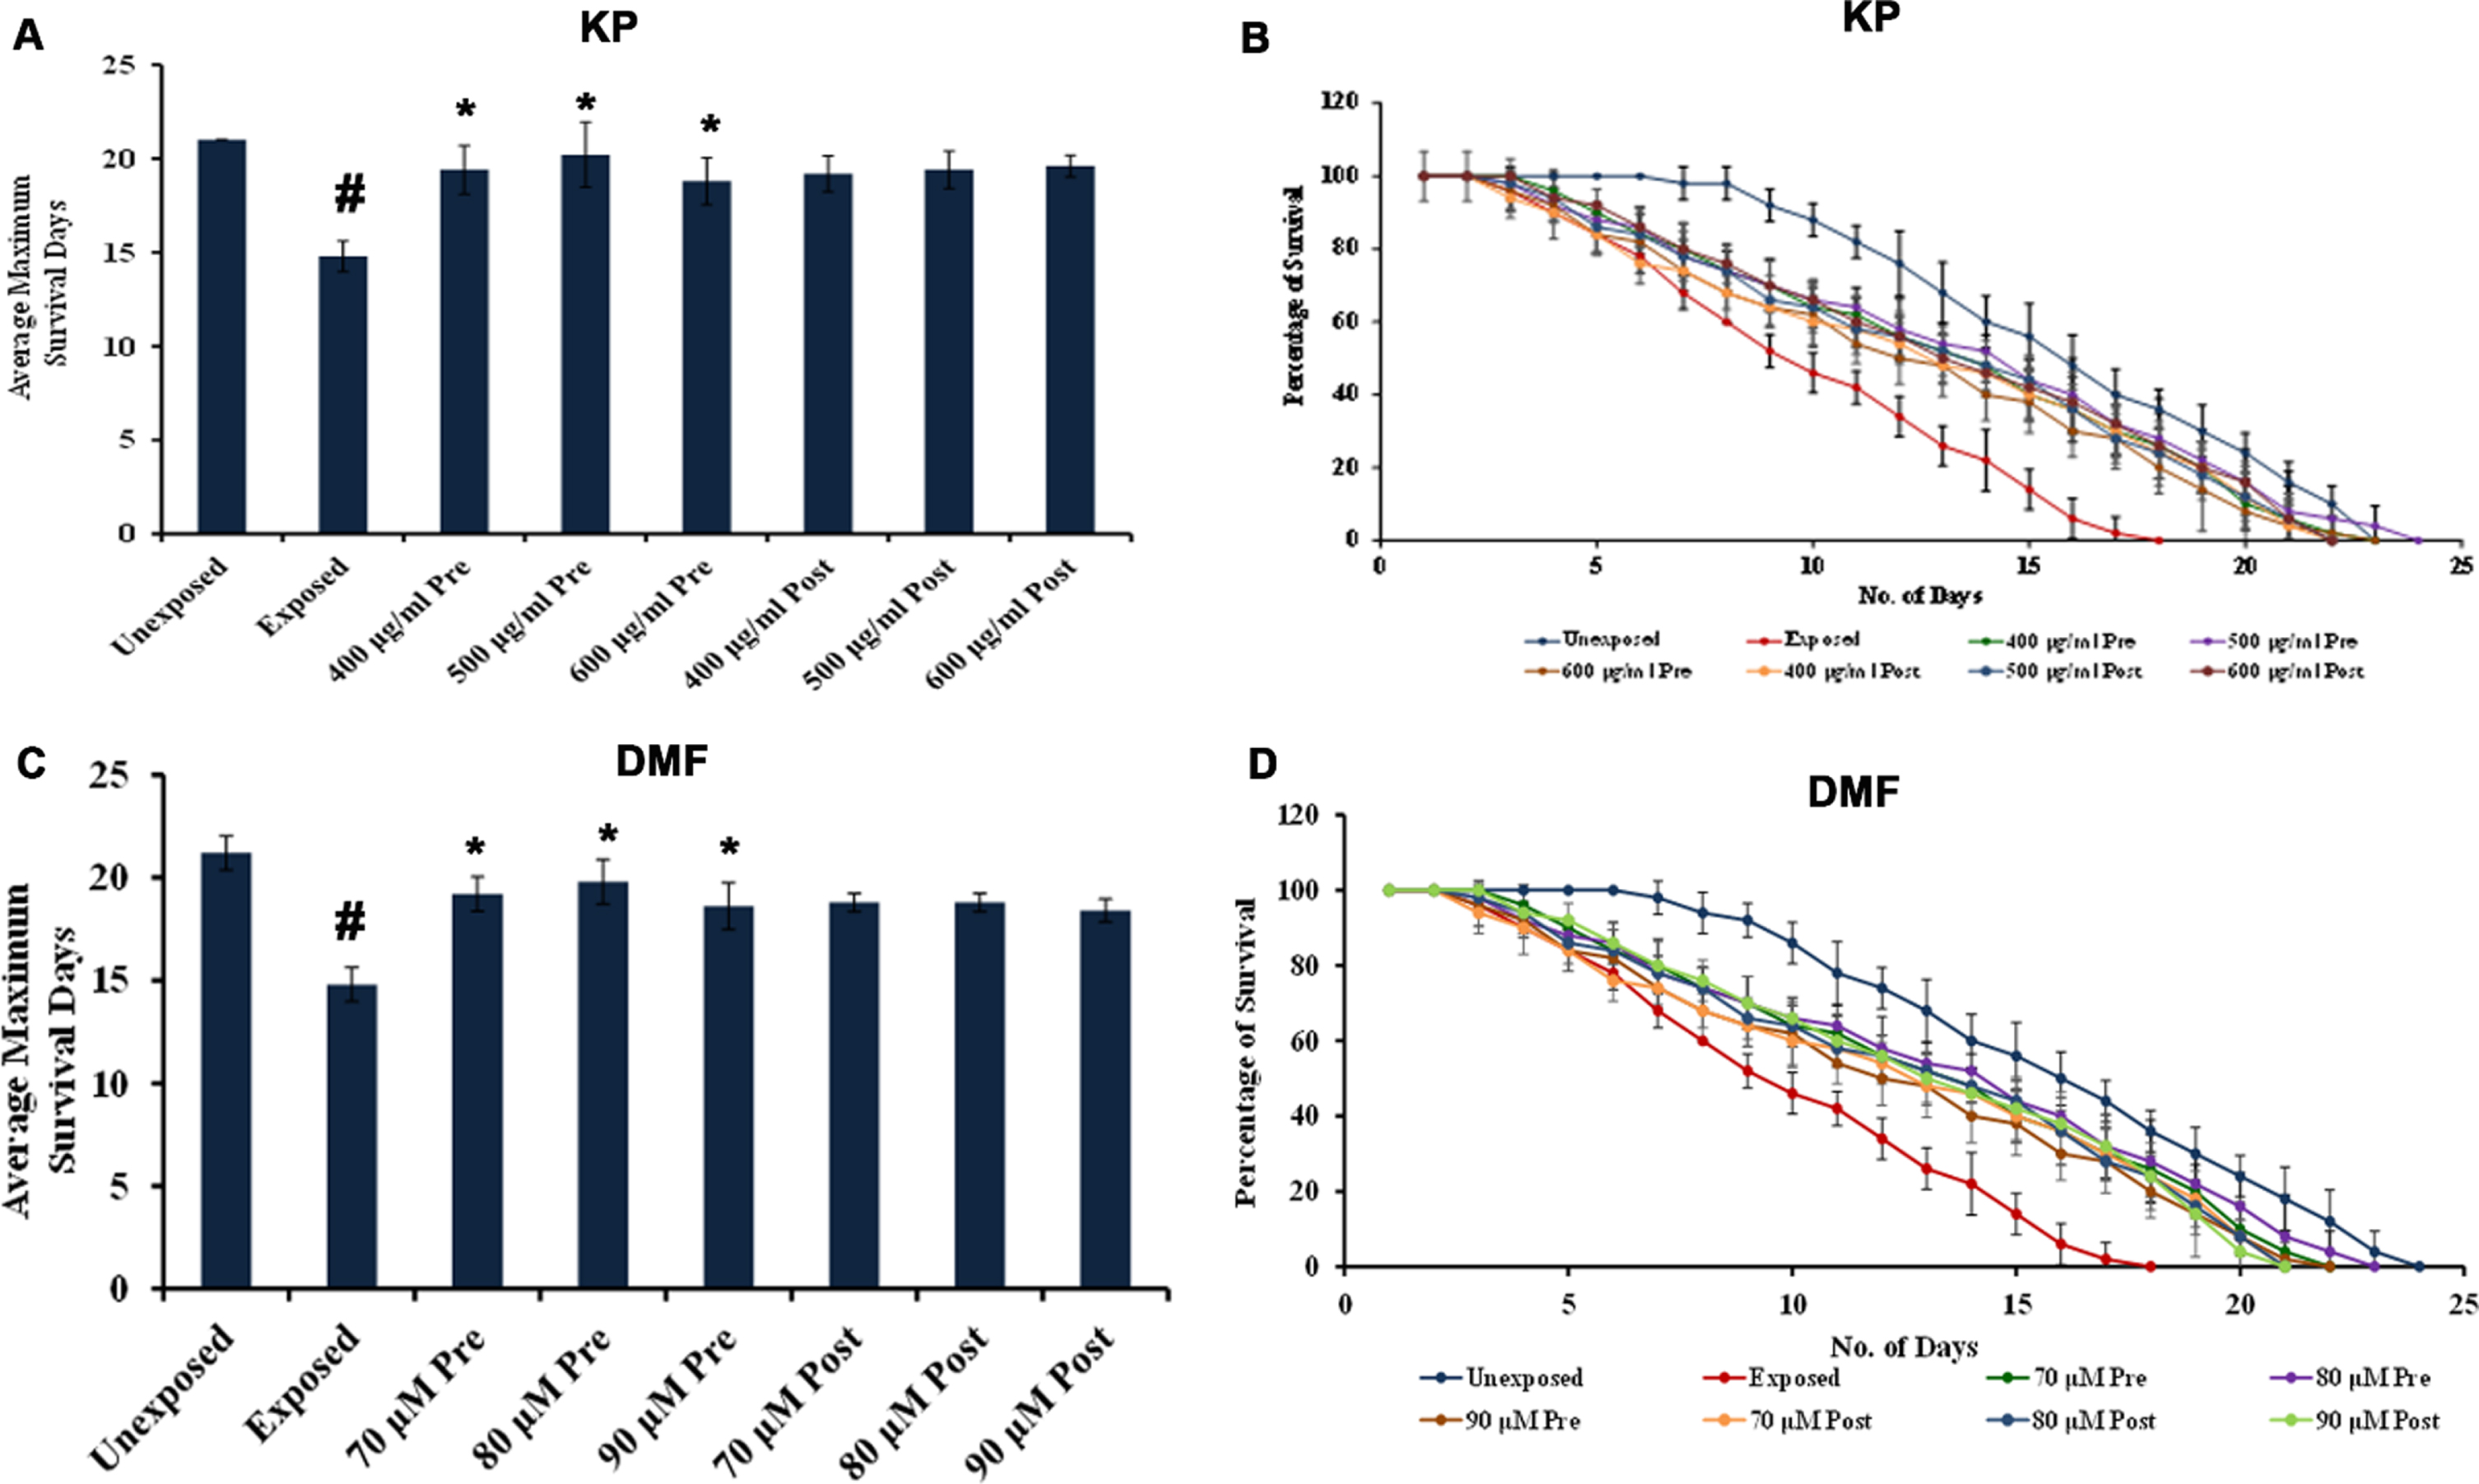 Pre-treatment with KP and DMF exhibit anti-photoaging potential against UV-A exposure. Graphs representing (A) Mean survival days by pre- and post-treatment of KP (400 –600μg/ml) upon exposure to UV-A (B) Lifespan extension by pre- and post-treatment of KP (400 –600μg/ml) during UV-A exposure (C) Mean survival days by pre- and post-treatment of DMF (70 –90μM) upon UV-A exposure (D) Lifespan extension by pre- and post-treatment of DMF (70 –90μM) during UV-A exposure. The pre-treatment of KP and DMF displayed significant (p <  0.05) anti-photo-aging effect compared to UV-A exposure.